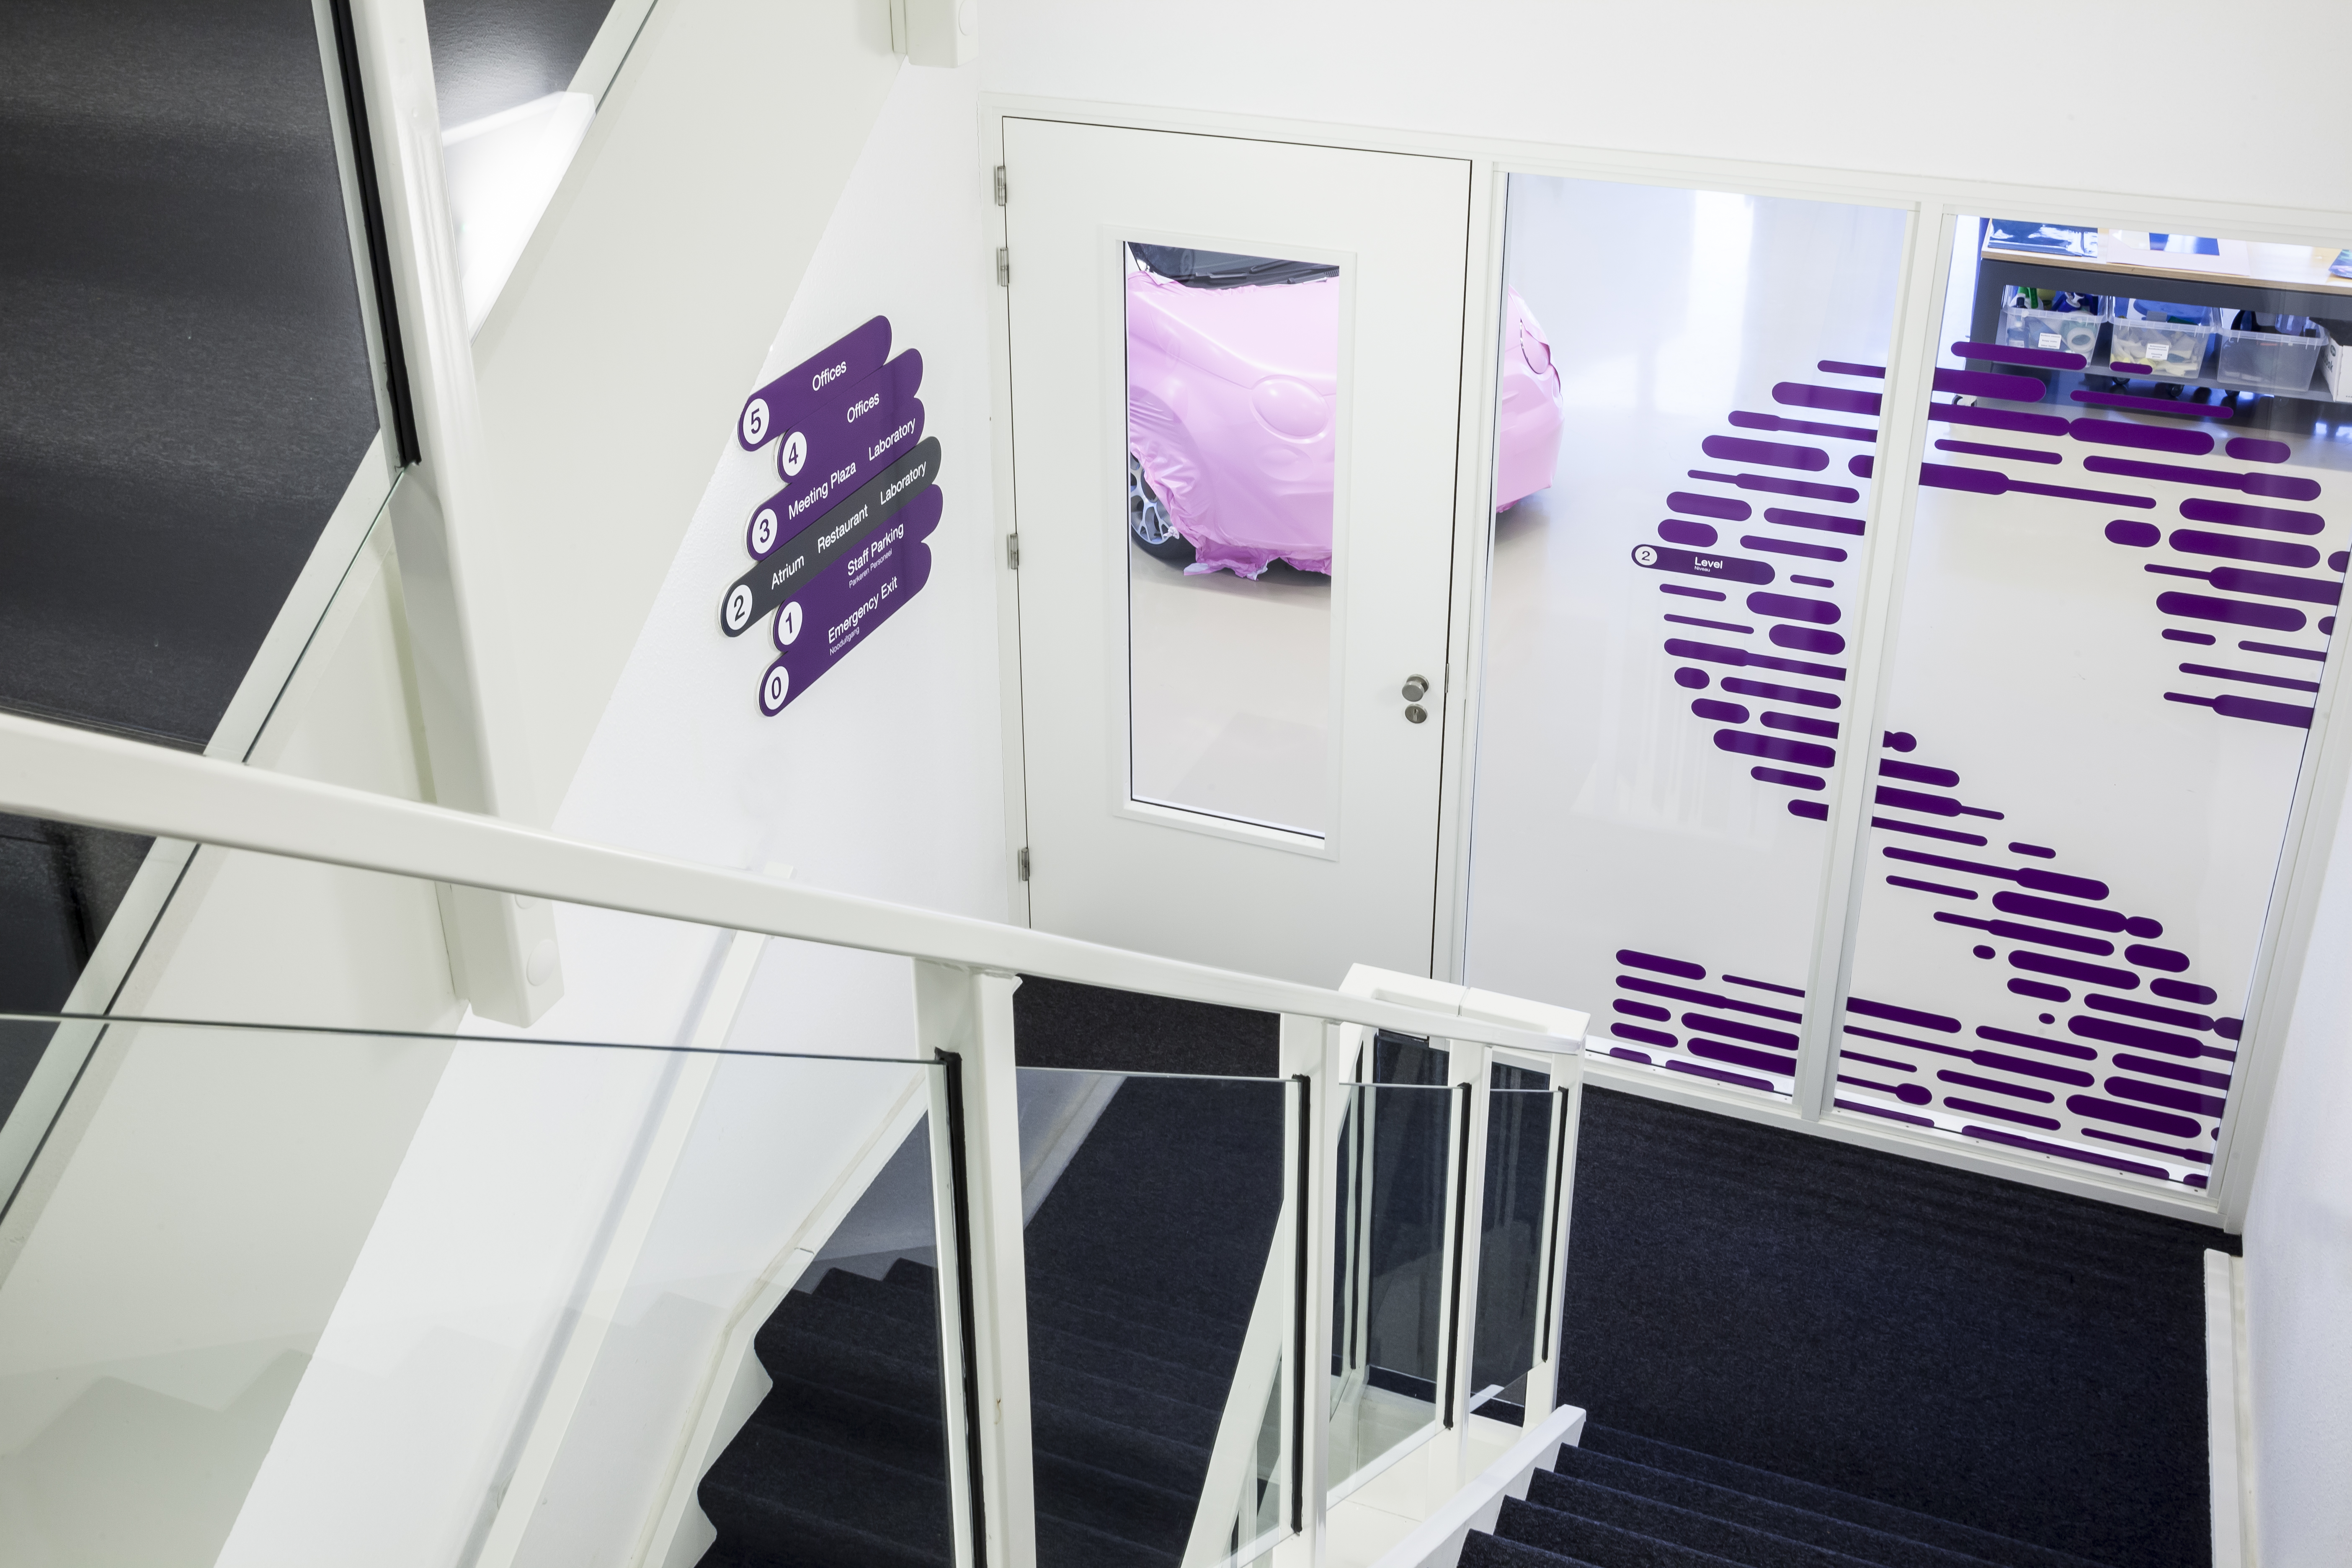 staircase 2 upper floor number 2 from purple dotted lines on glass wall and signpost